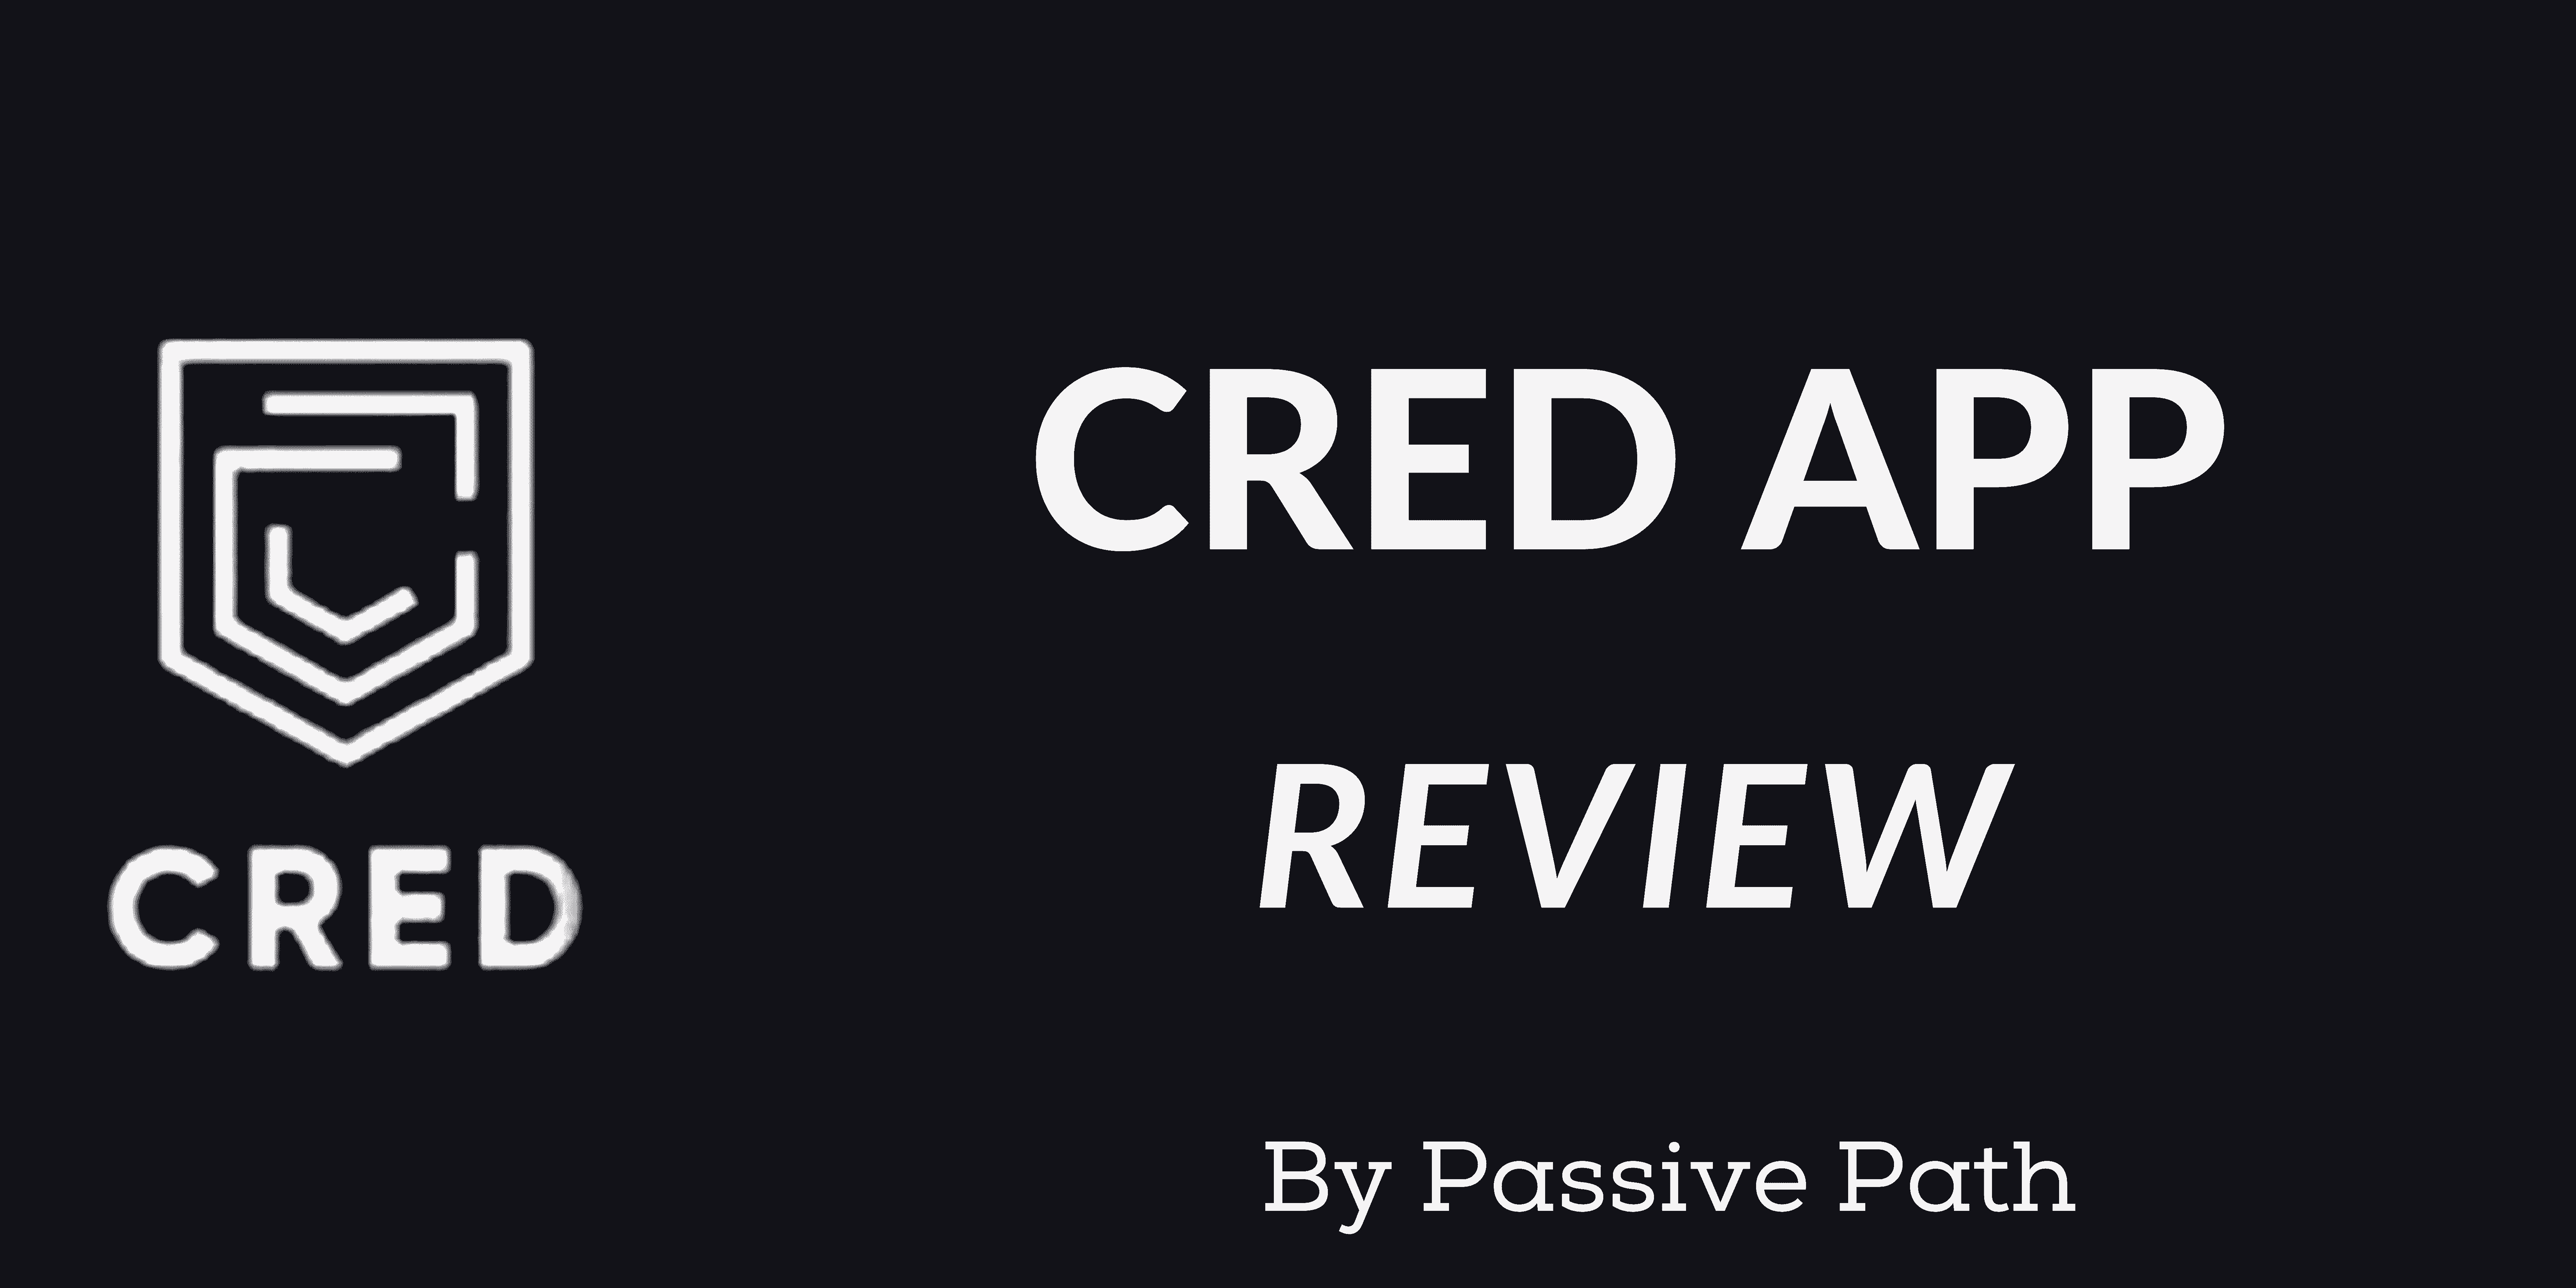 CRED APP review